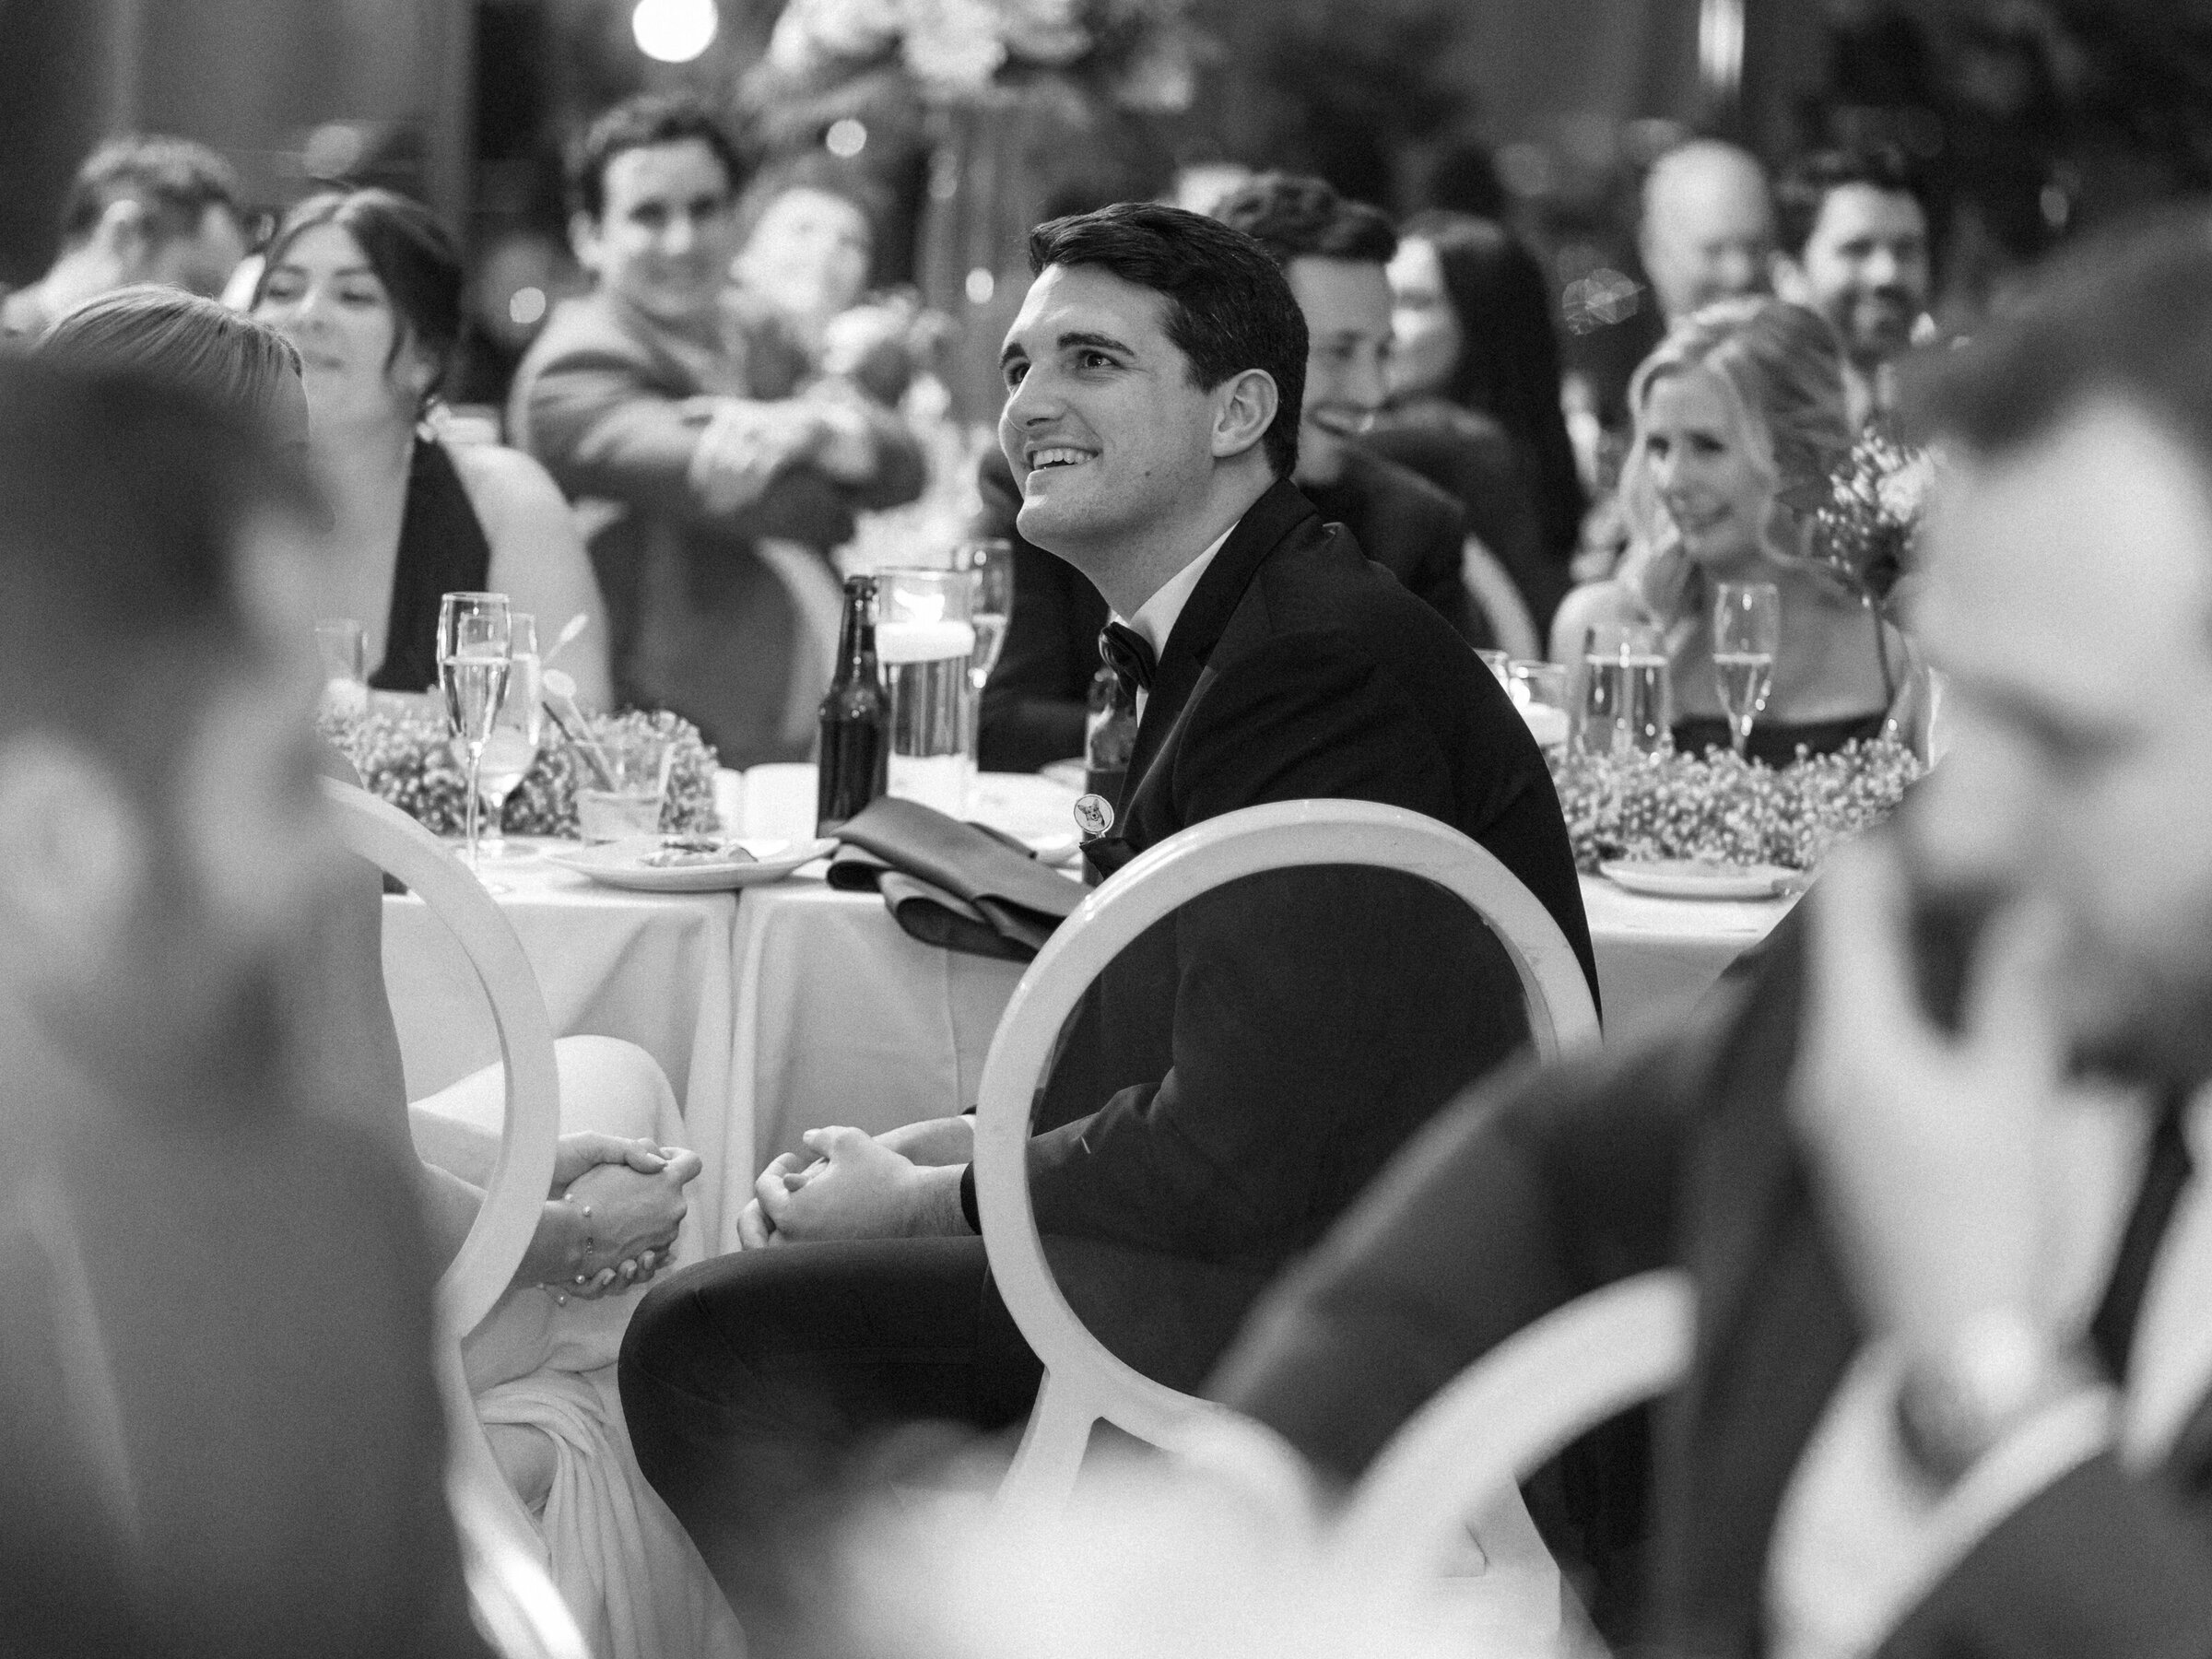 A groom smiles and laughs during toasts at their wedding reception in Cincinnati, Ohio.